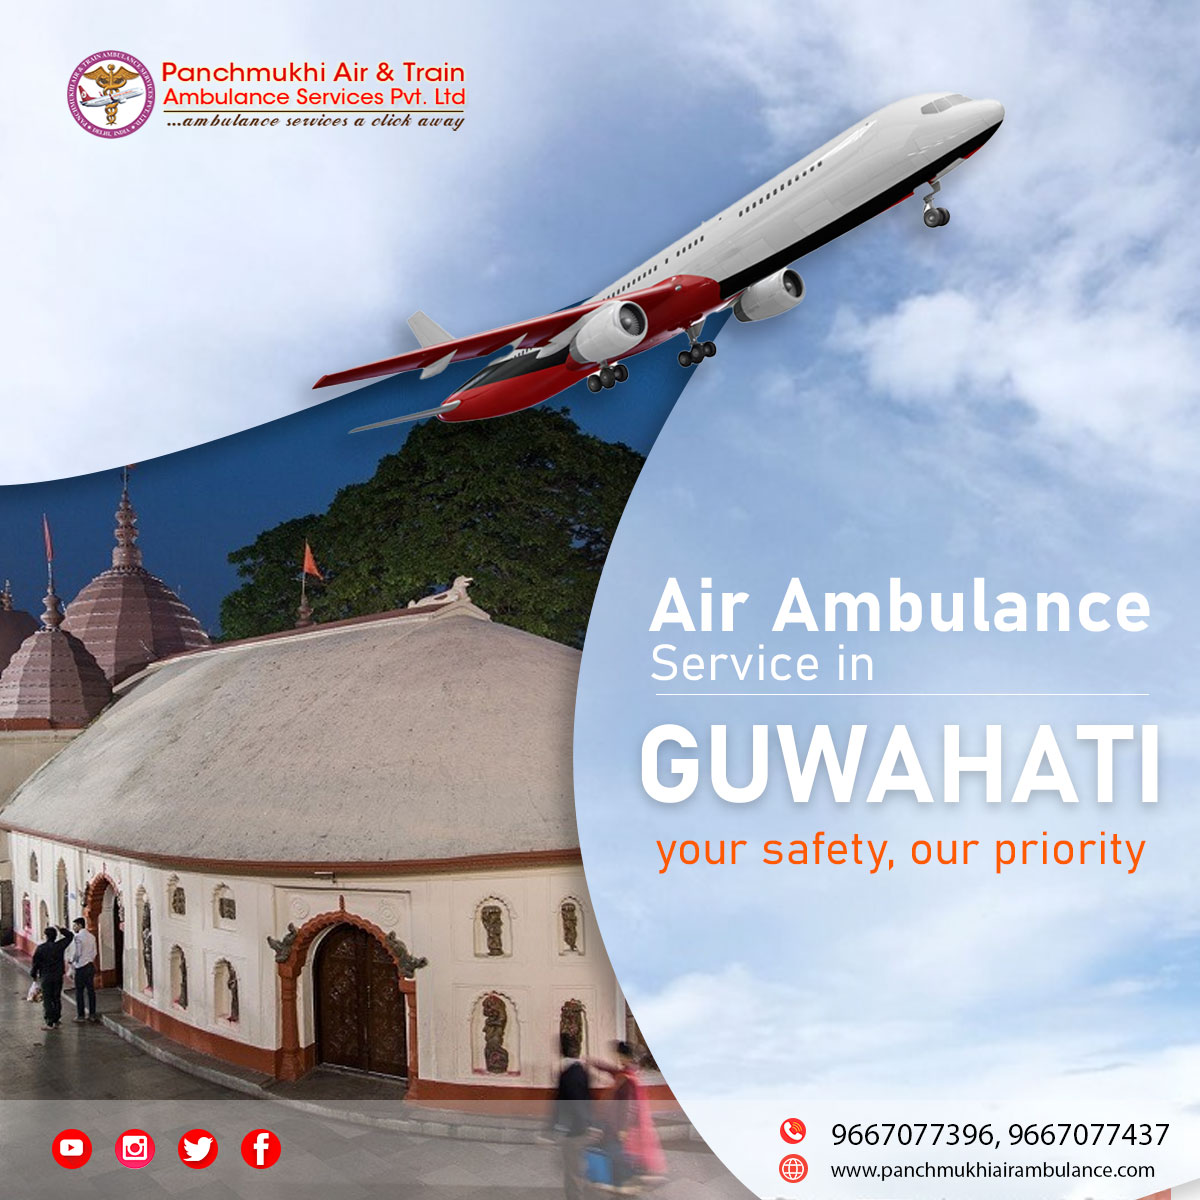 New Charter Air Ambulance Services in Guwahati